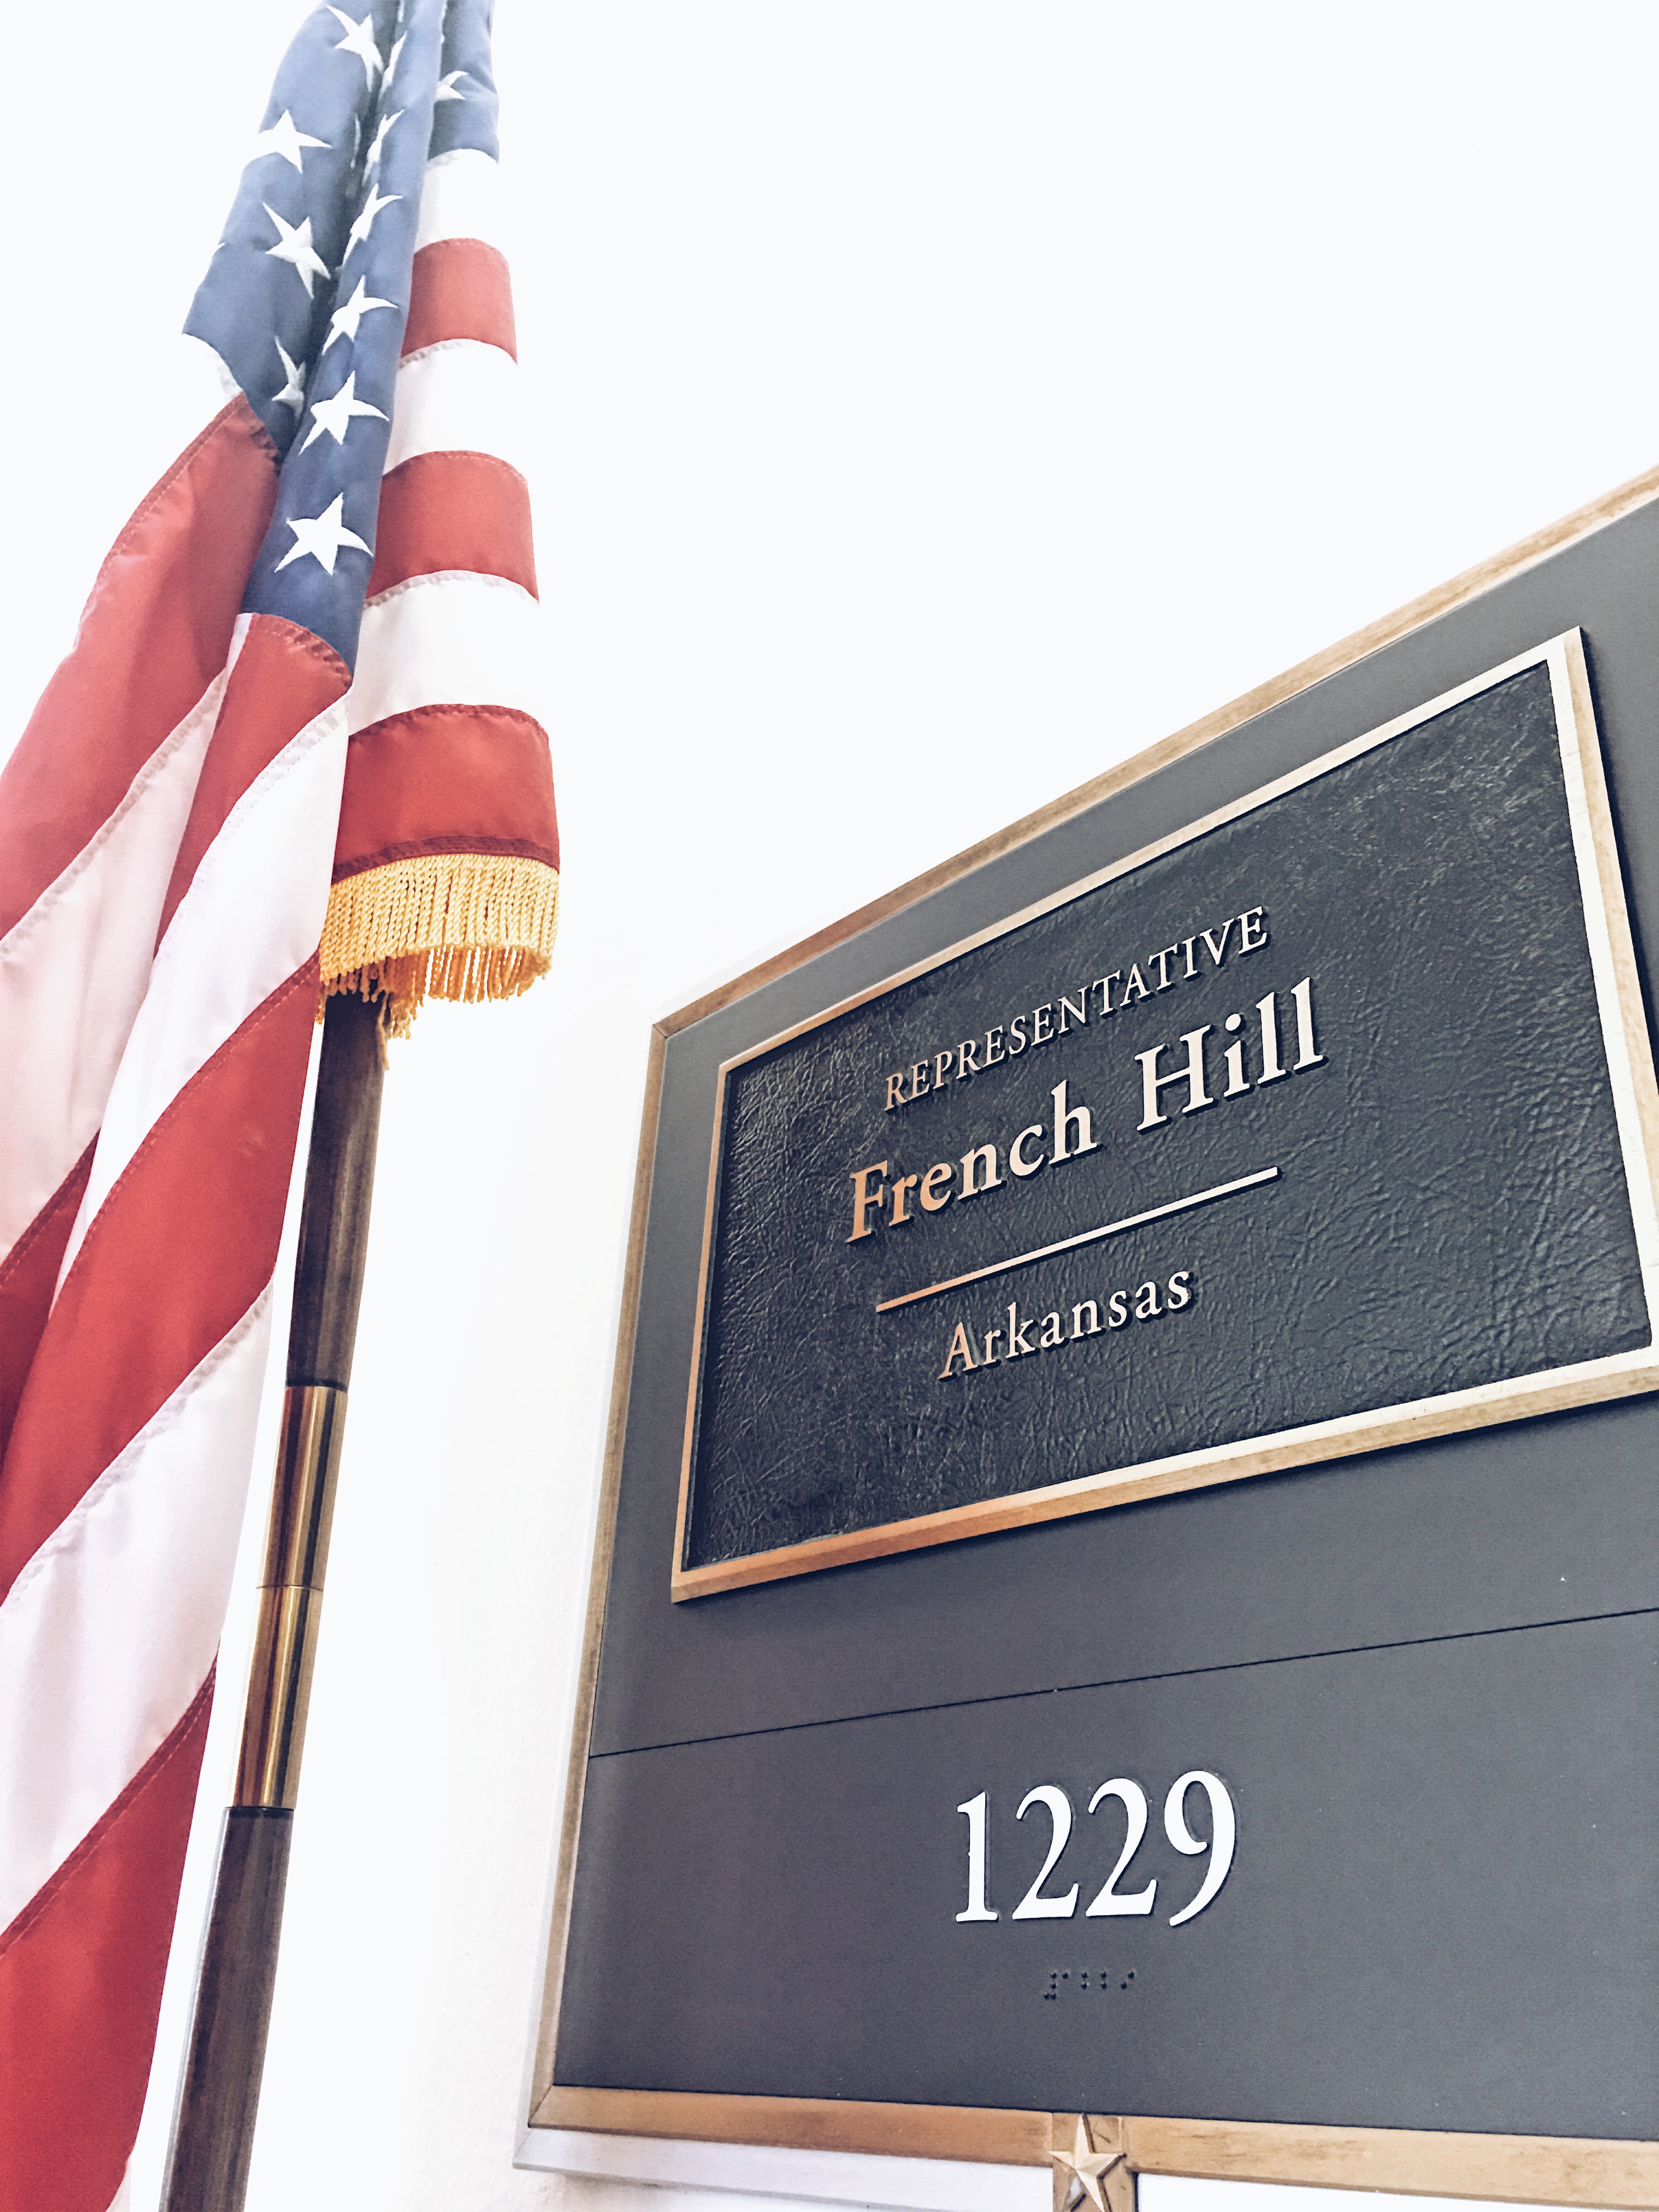 Congressman French Hill's Office